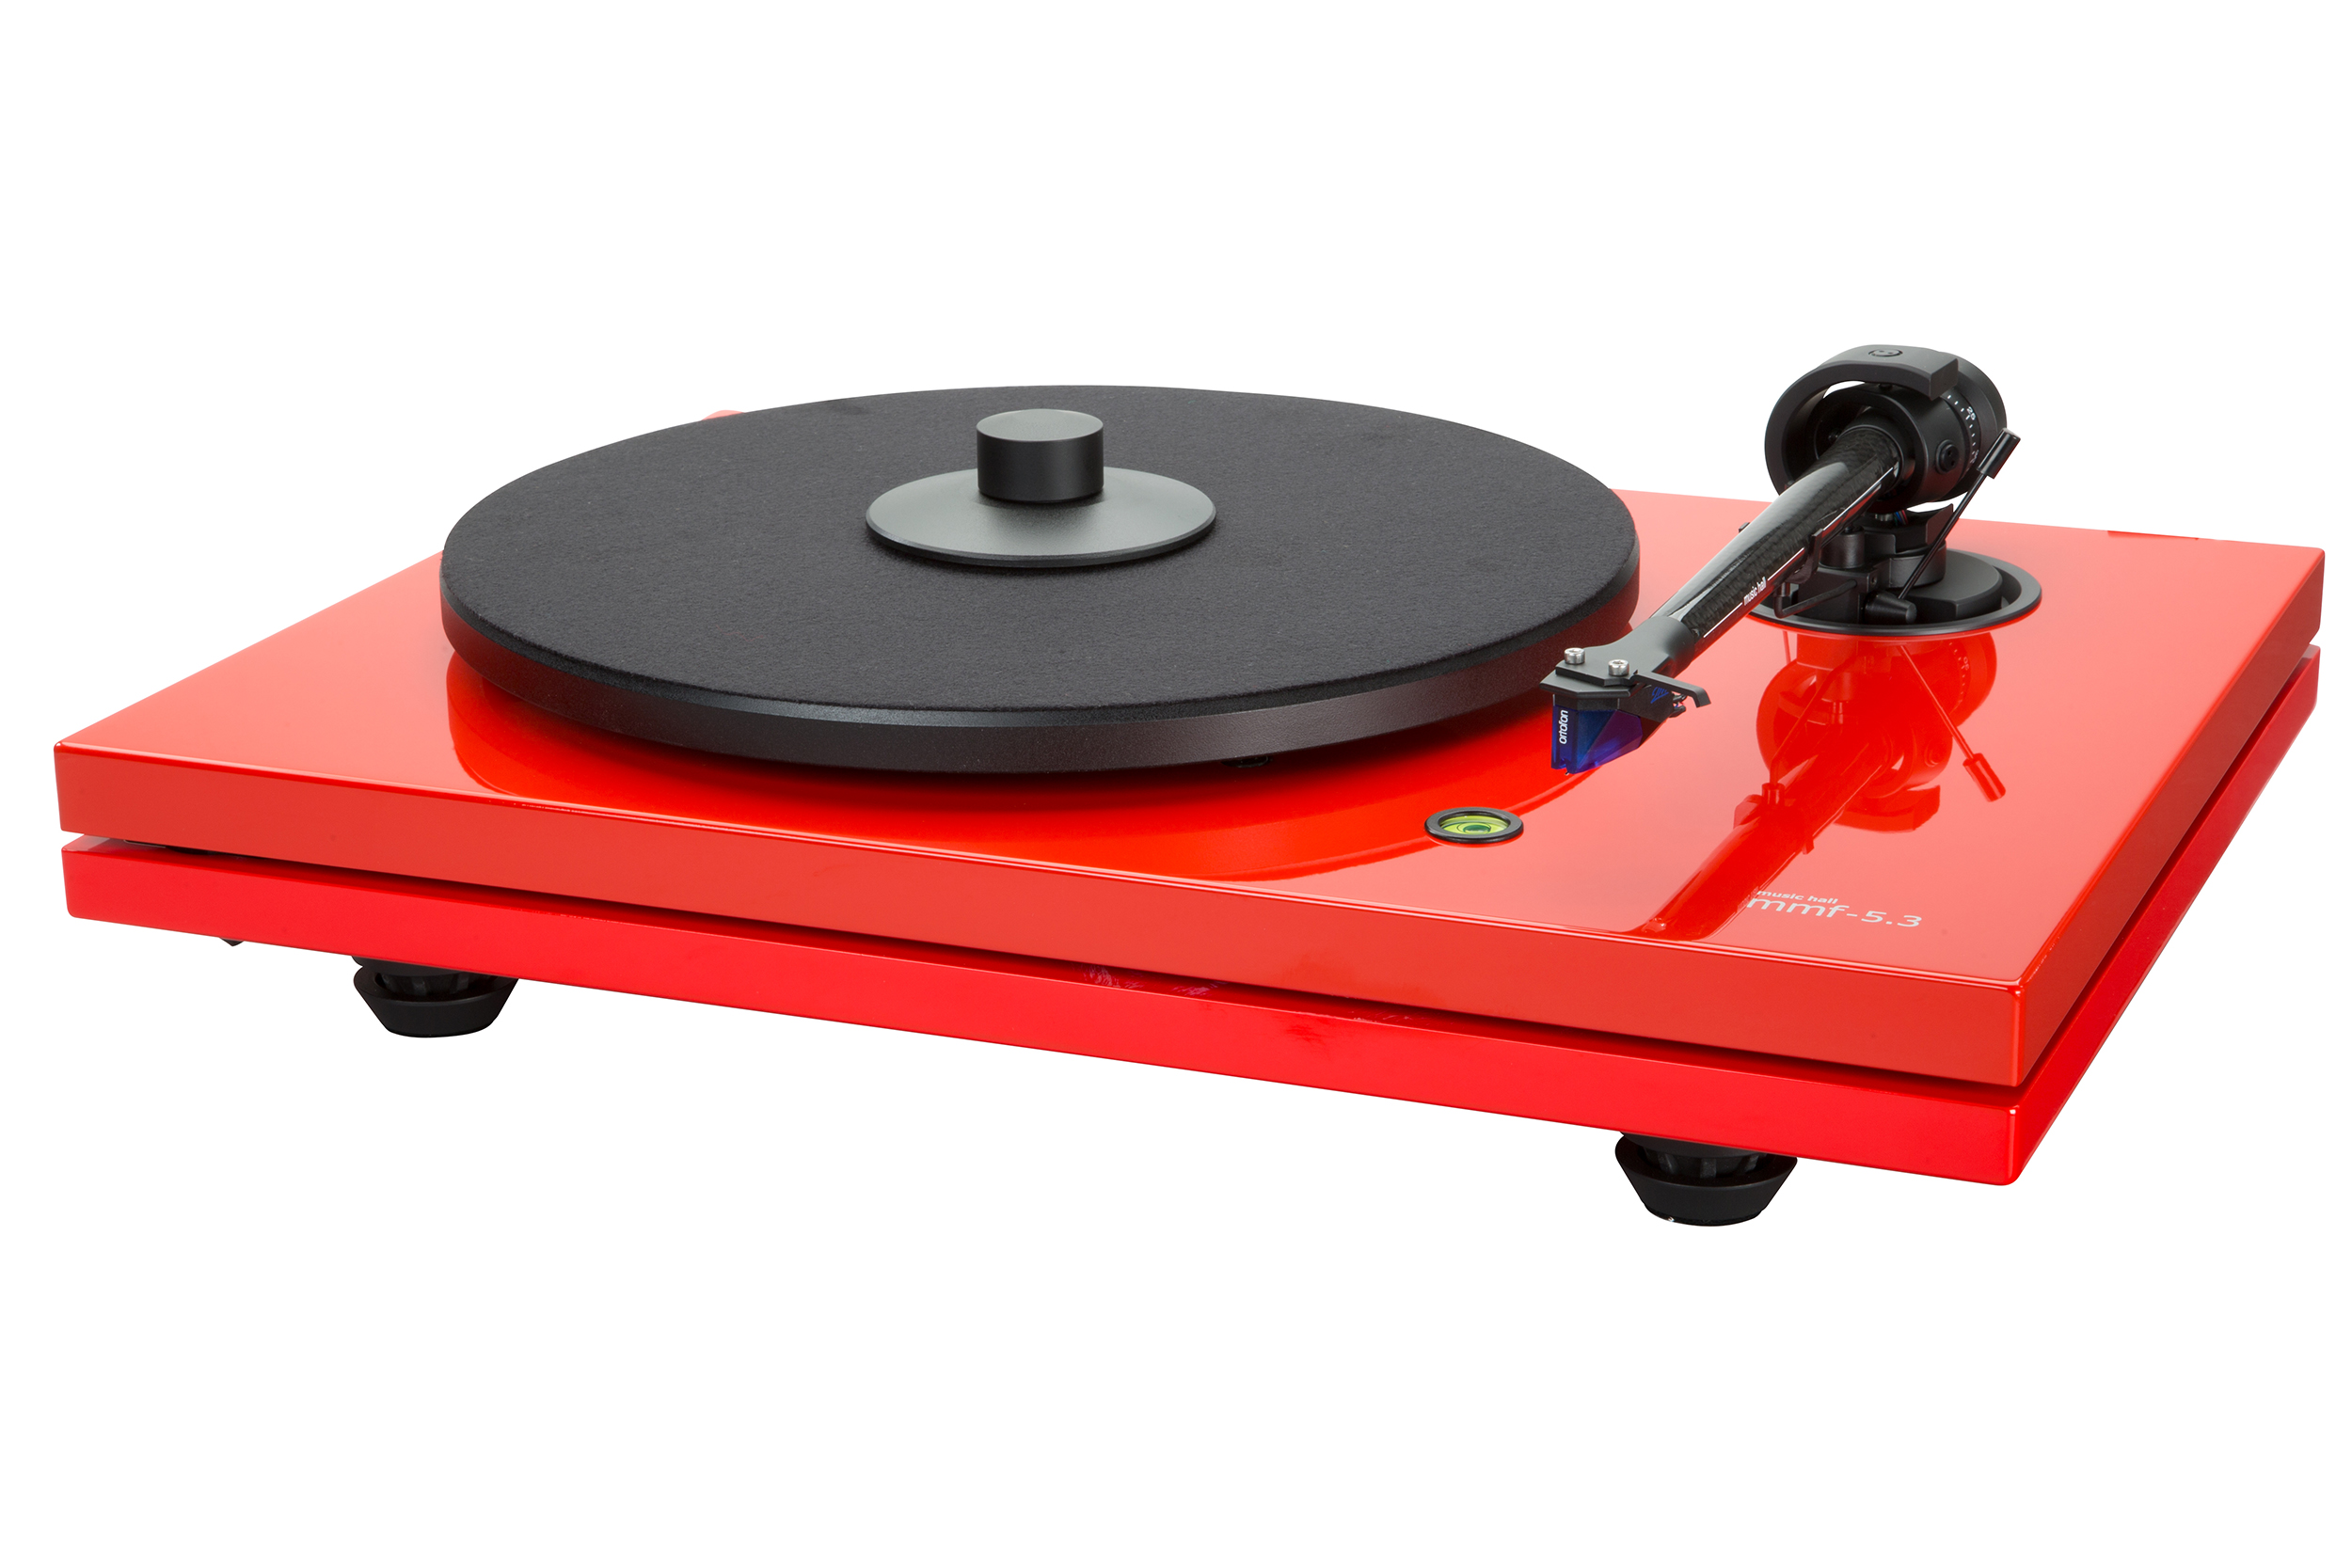 MMF-5.3LE, turntable with Ortofon Blue, red